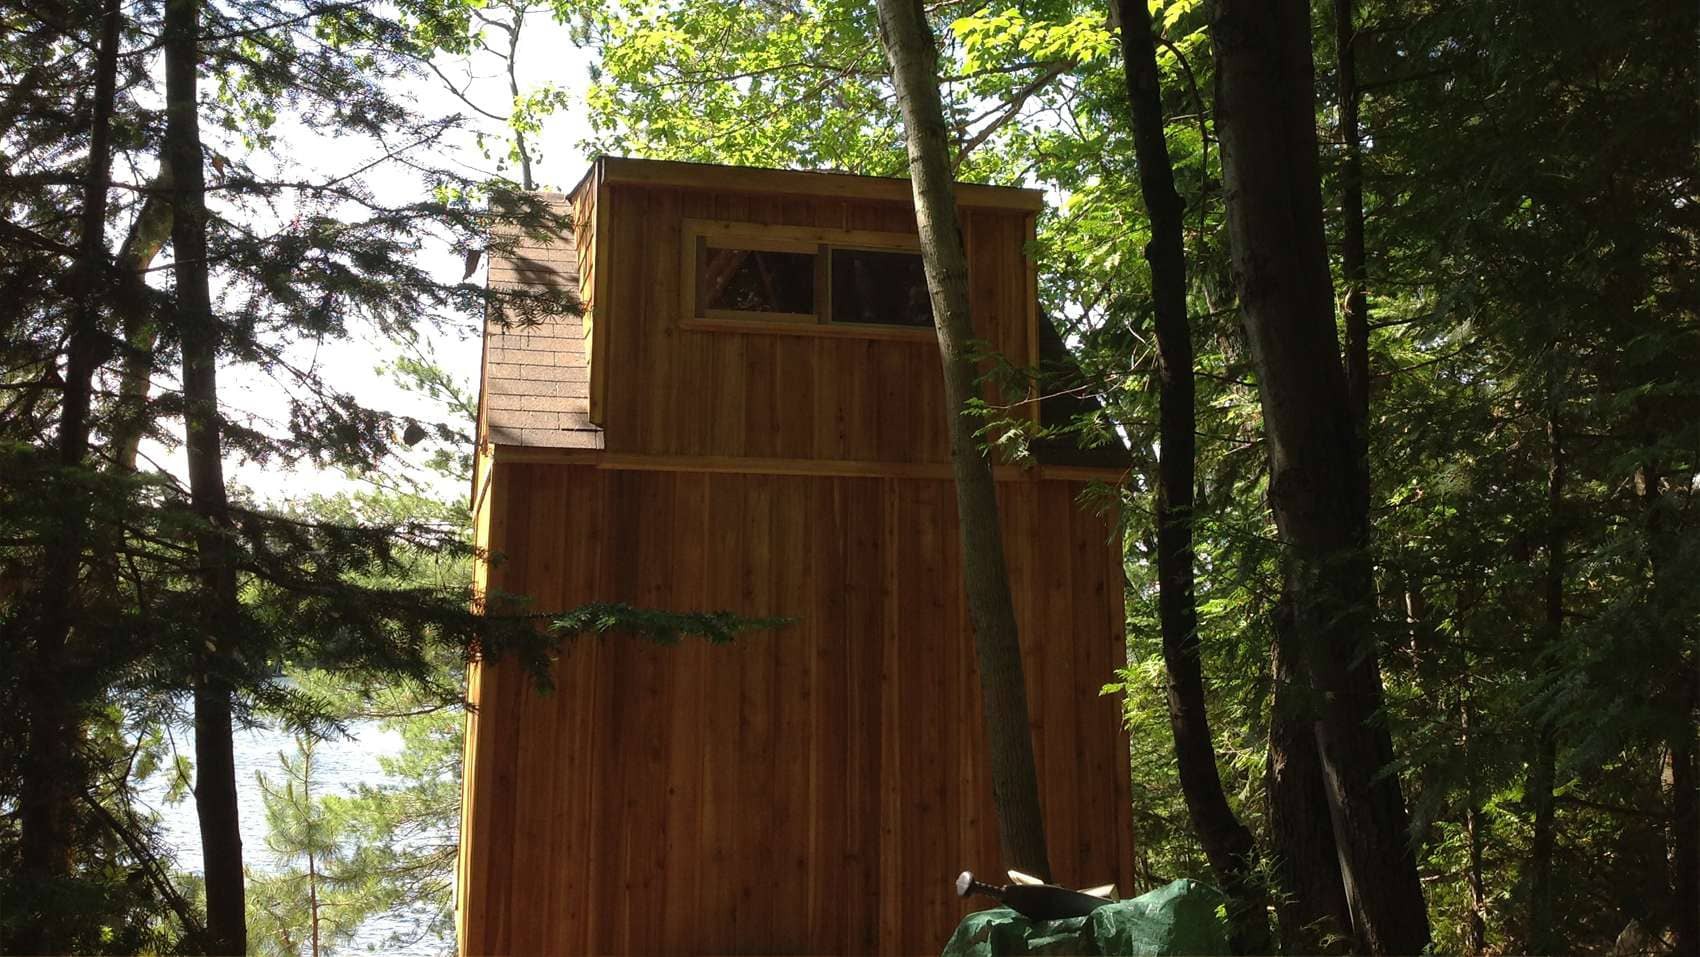 Prefab Bala bunkie kit 10 x 10 with pine loft in Temagami Ontario. ID Number 199643-6